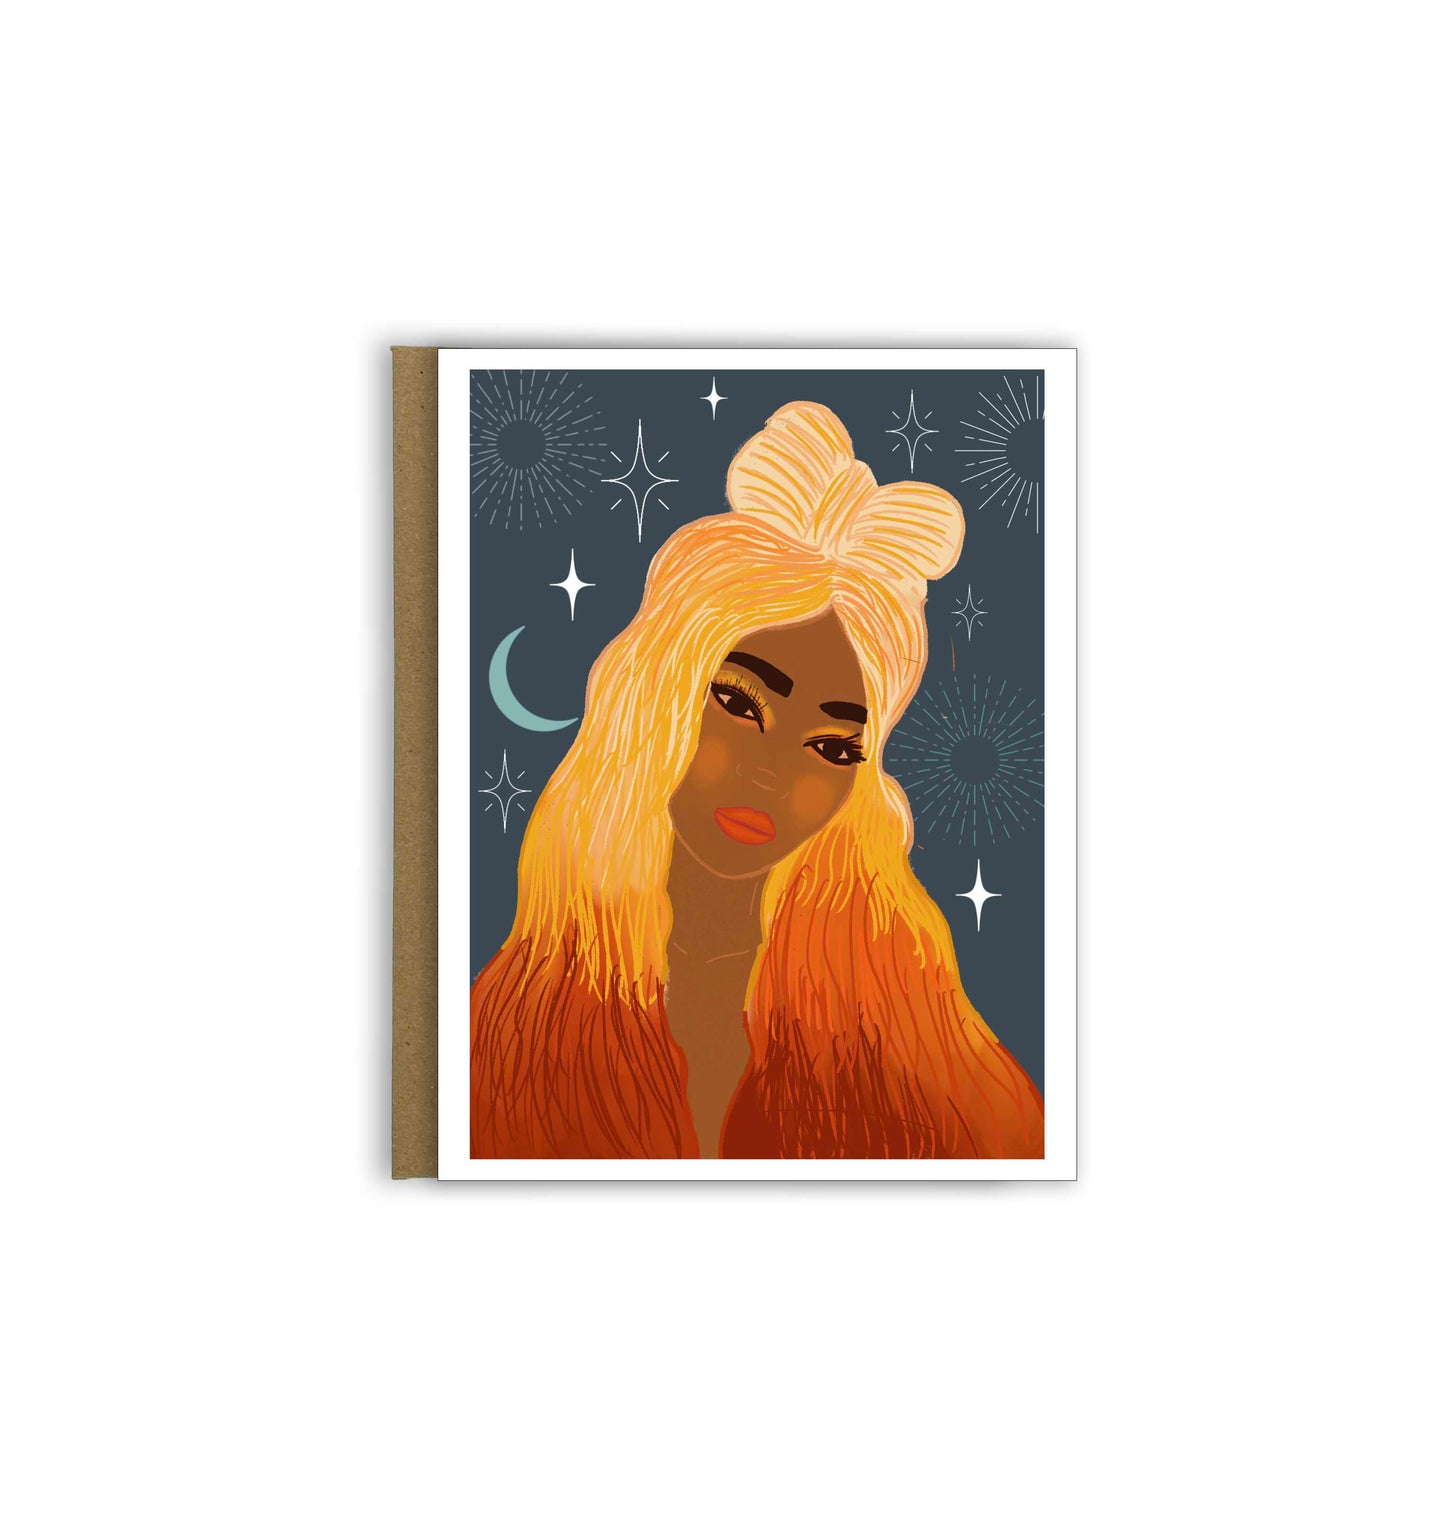 Goddess of the stars, Celestial Greeting Cards, Cards for Black and Brown Women